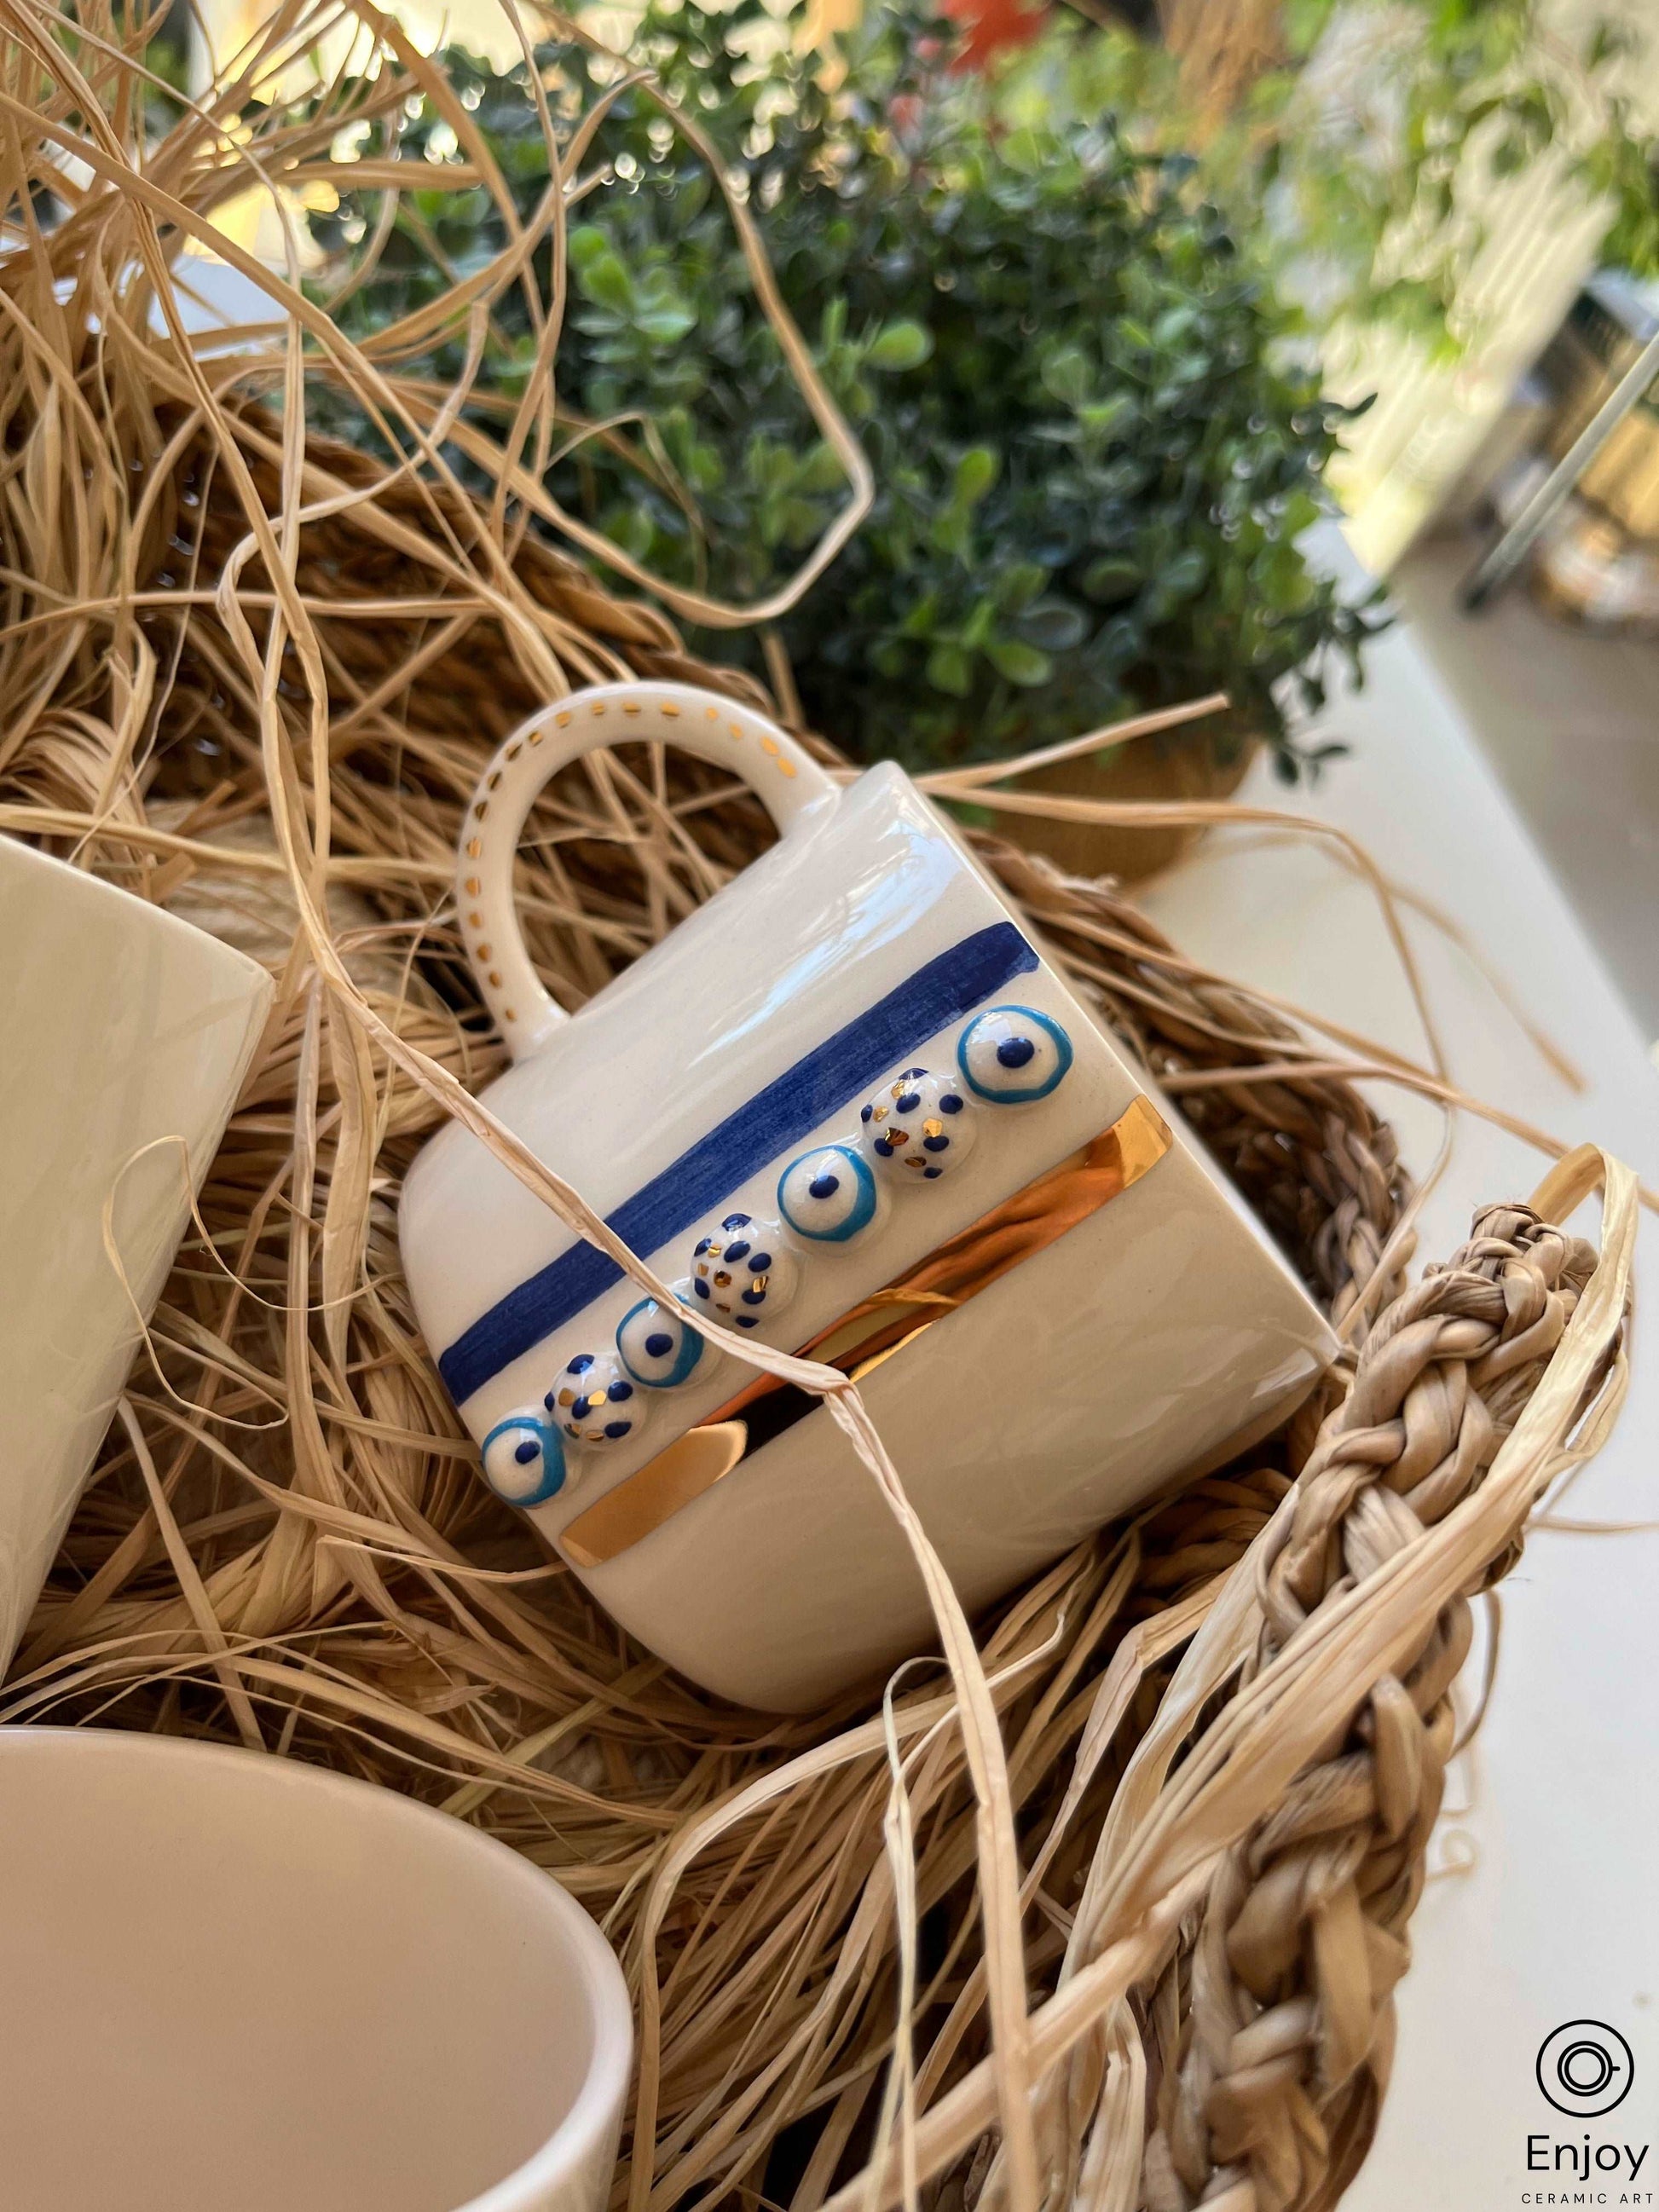 A white ceramic mug with a golden rim, adorned with blue evil eye patterns, partially hidden in a nest of natural straw, resting on a woven placemat, with a blurred background of green plants, presenting a cozy and inviting atmosphere.